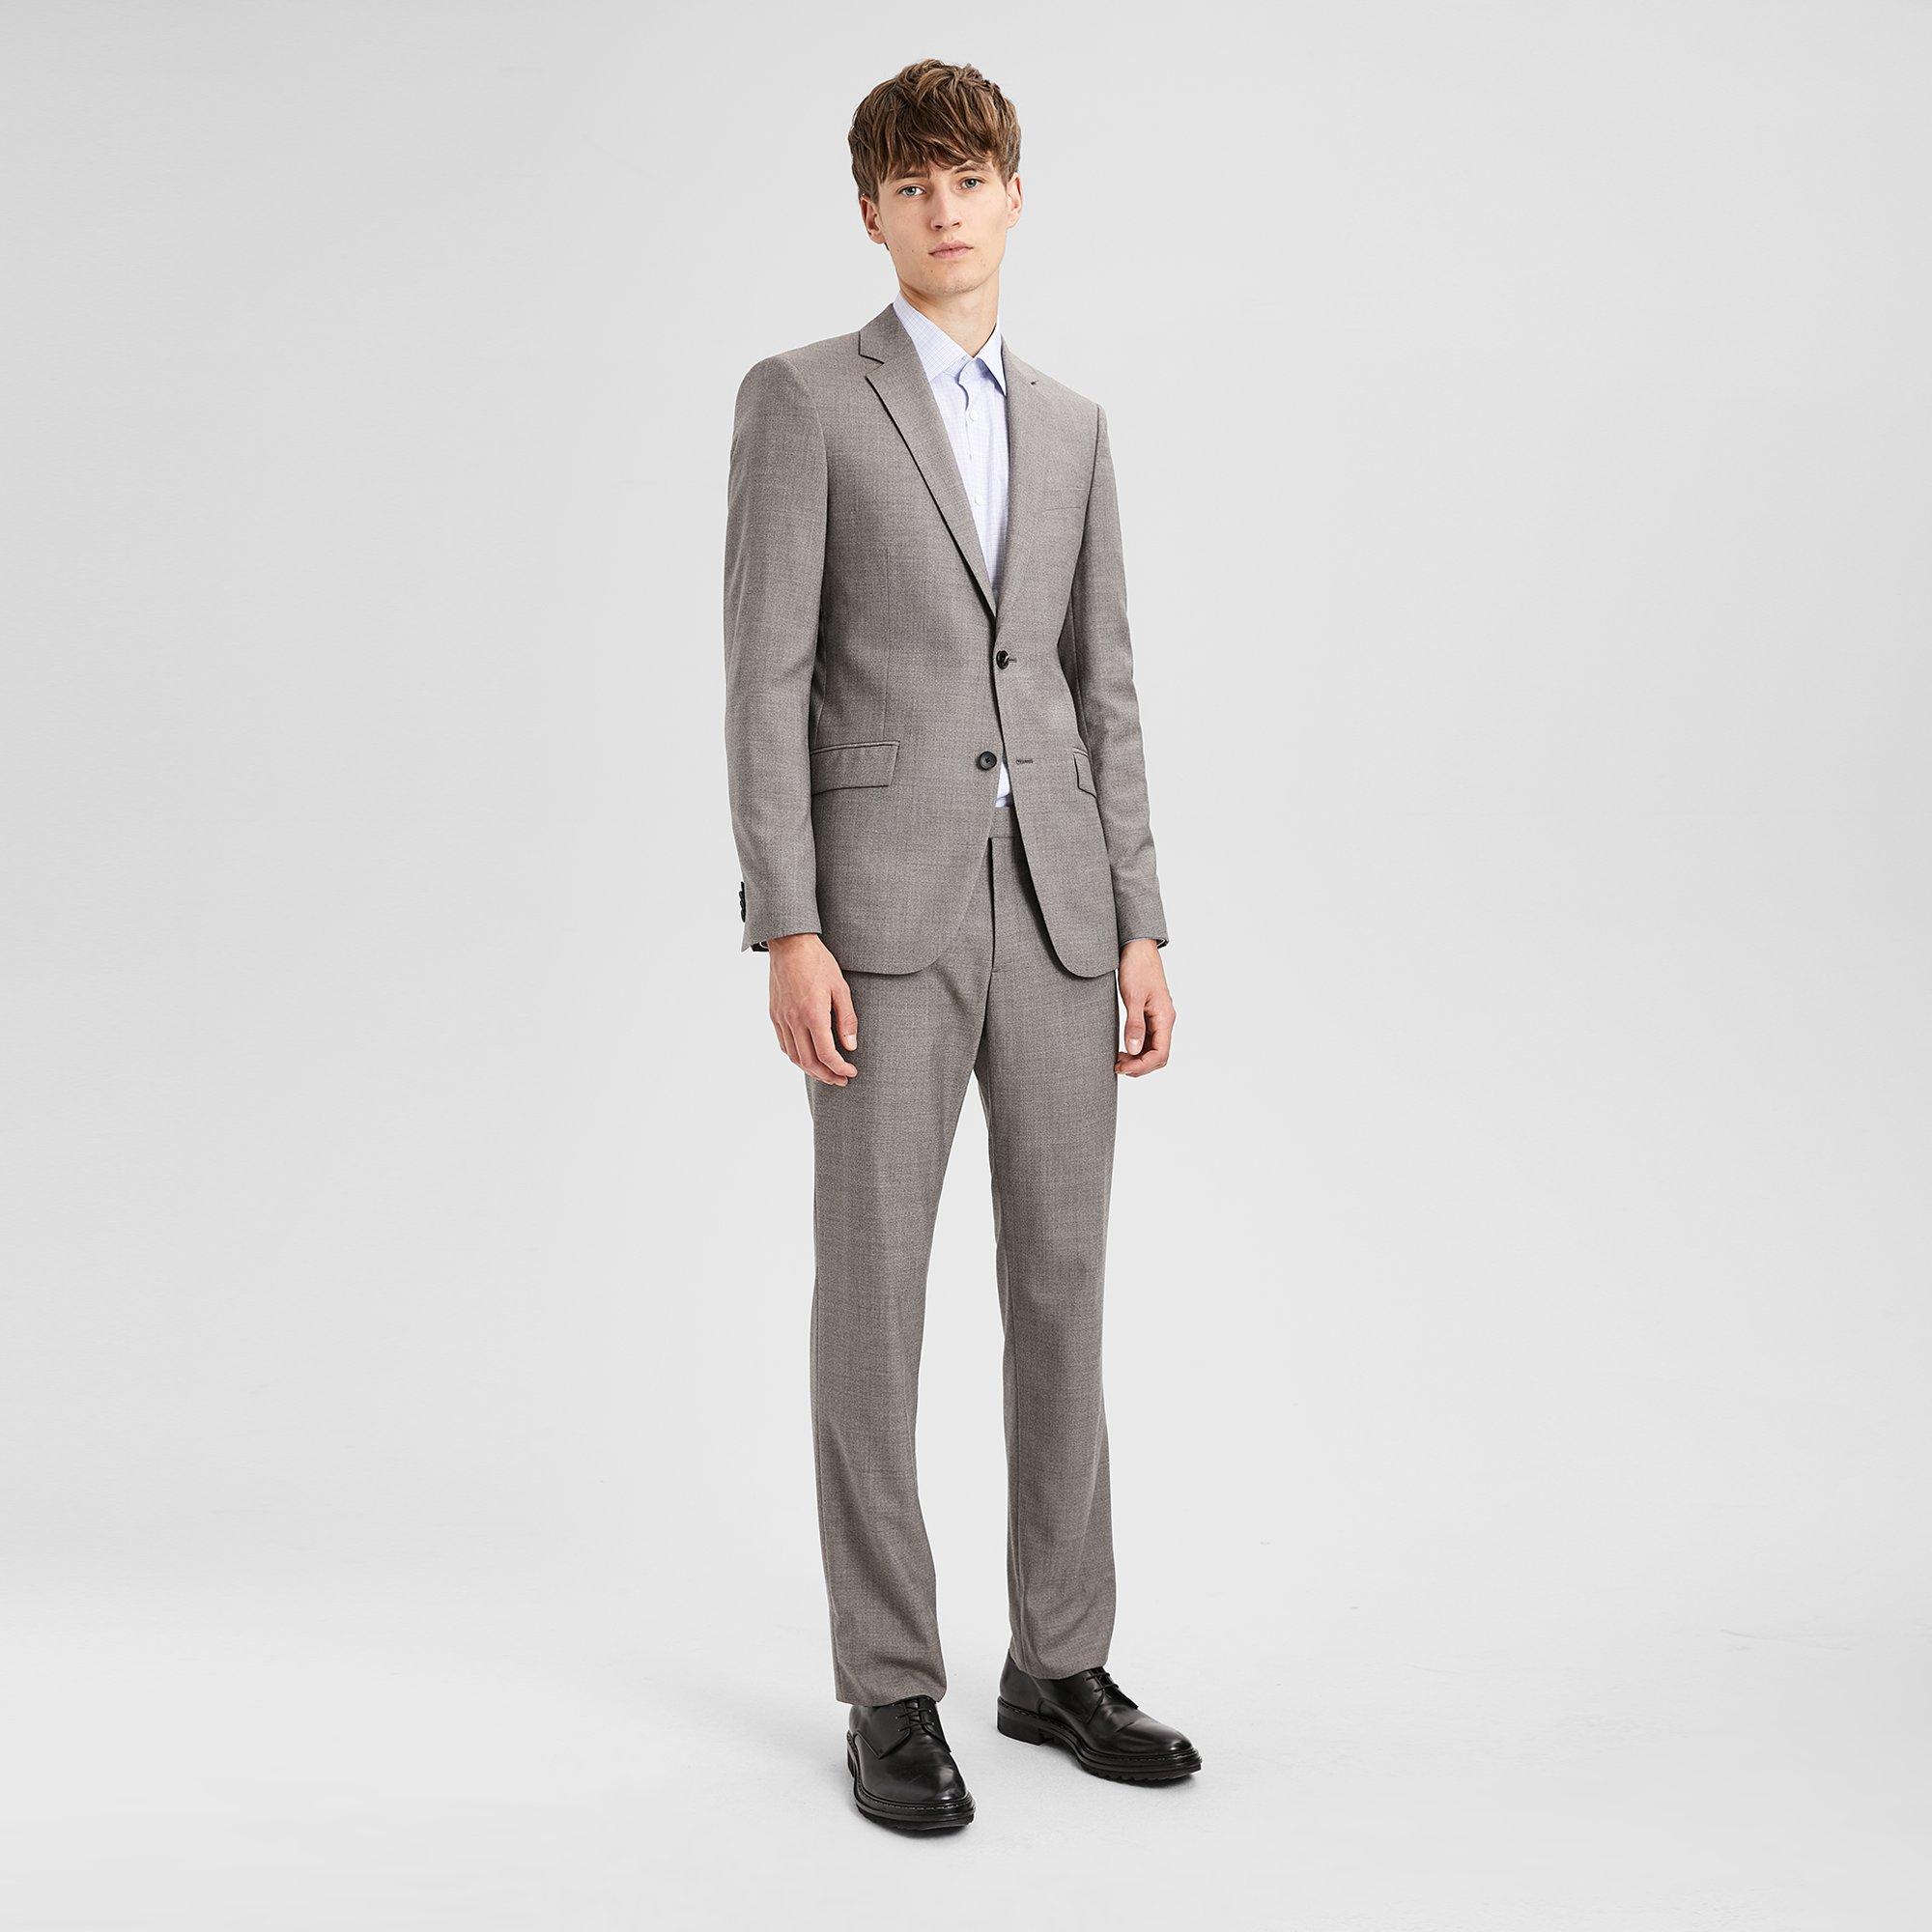 Men’s Suits | Theory